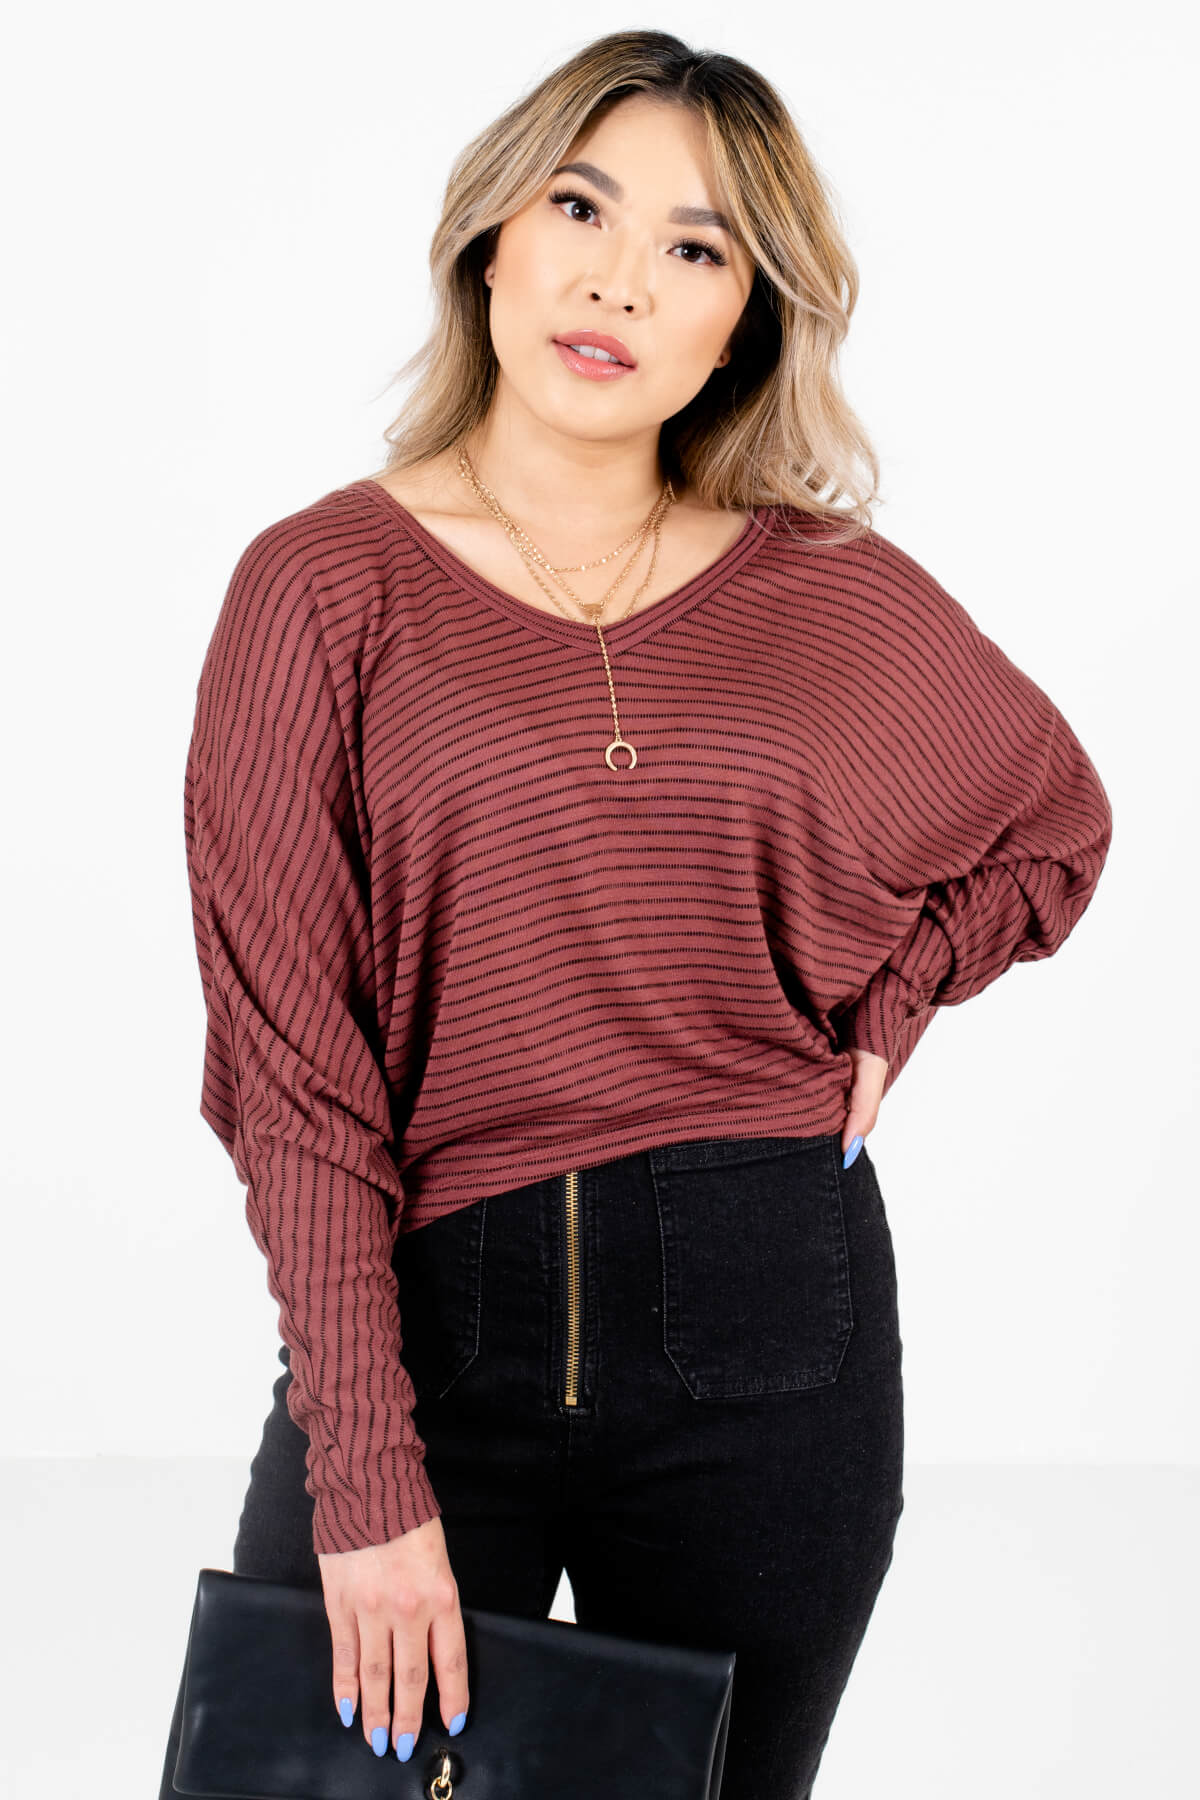 Women's Mauve Cute and Comfortable Boutique Tops for Women